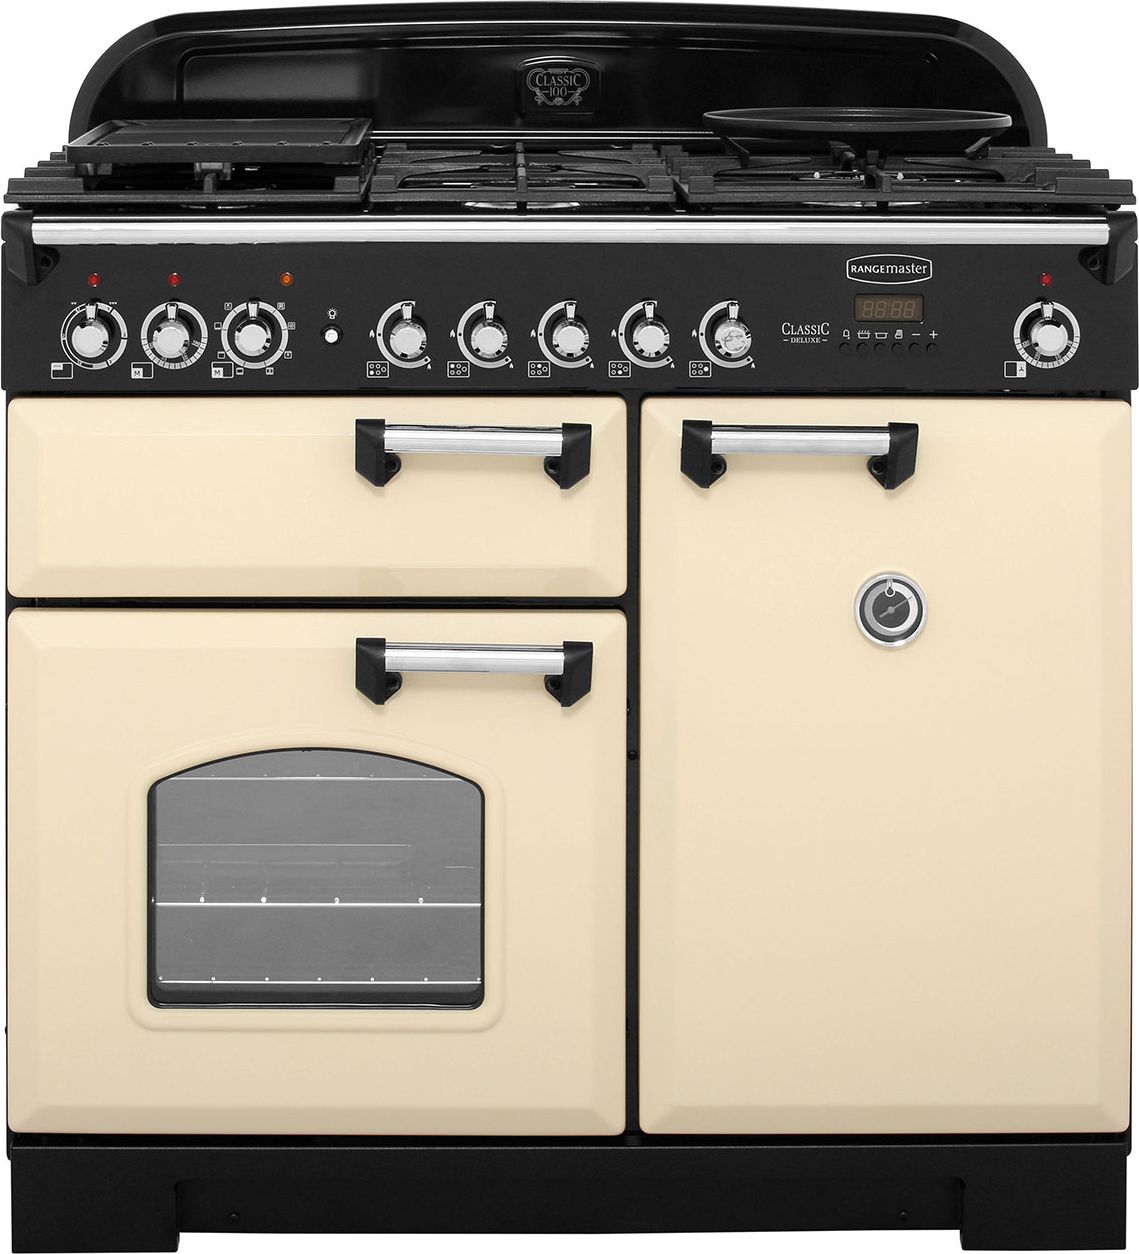 Rangemaster Classic Deluxe CDL100DFFCR/C 100cm Dual Fuel Range Cooker - Cream / Chrome - A/A Rated, Cream